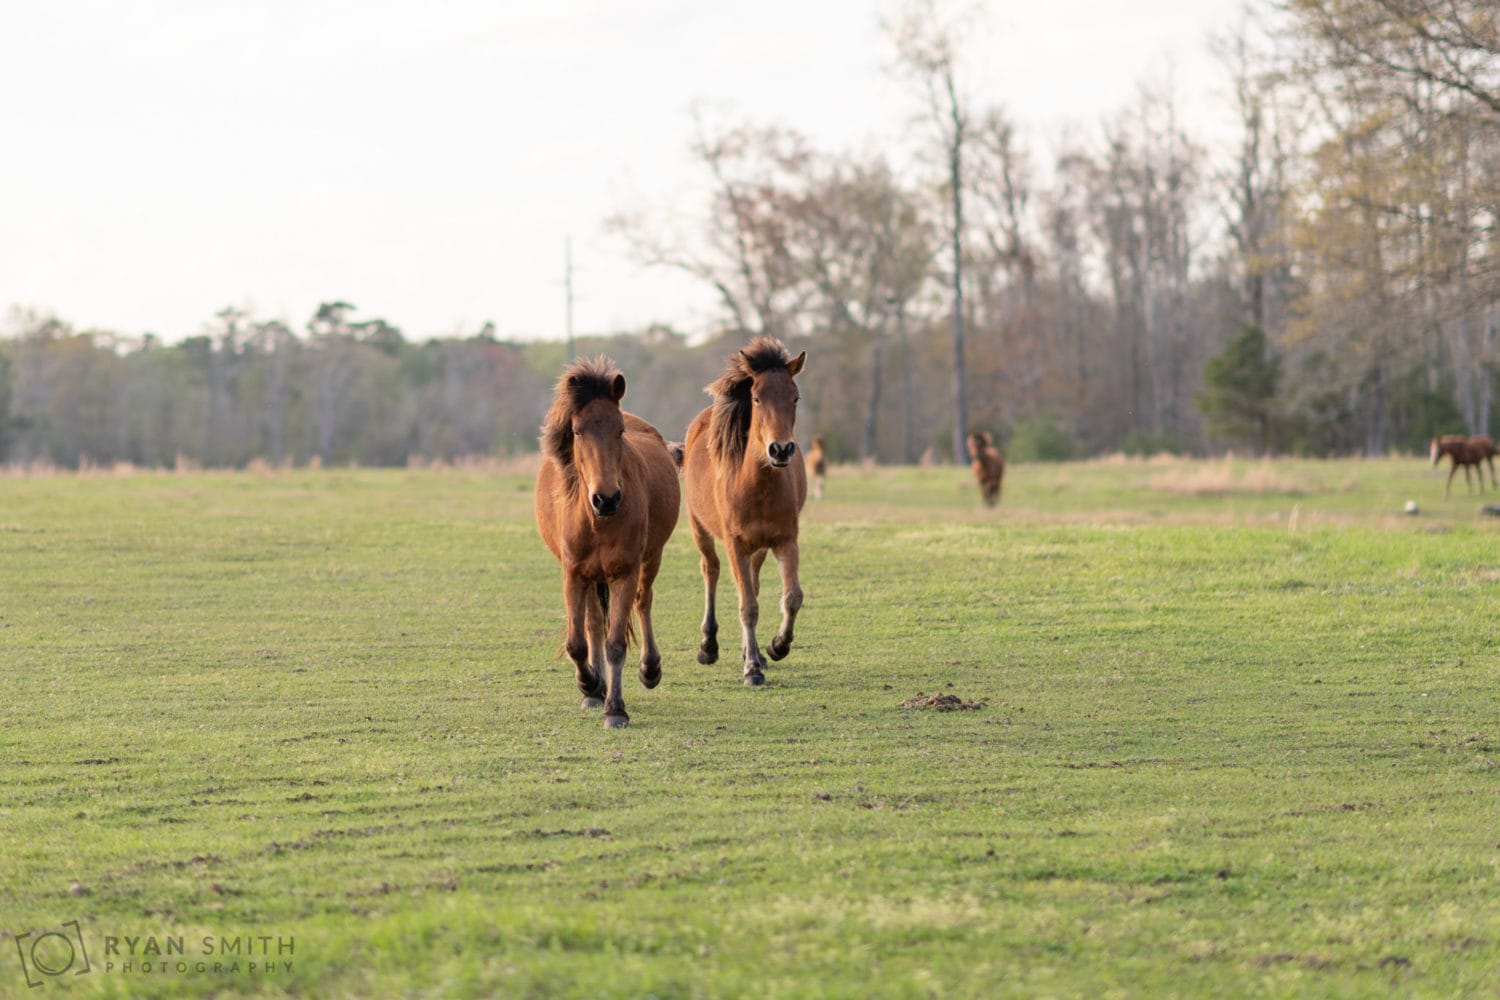 Horses running to meet us - Wildhorse at Parker Farms